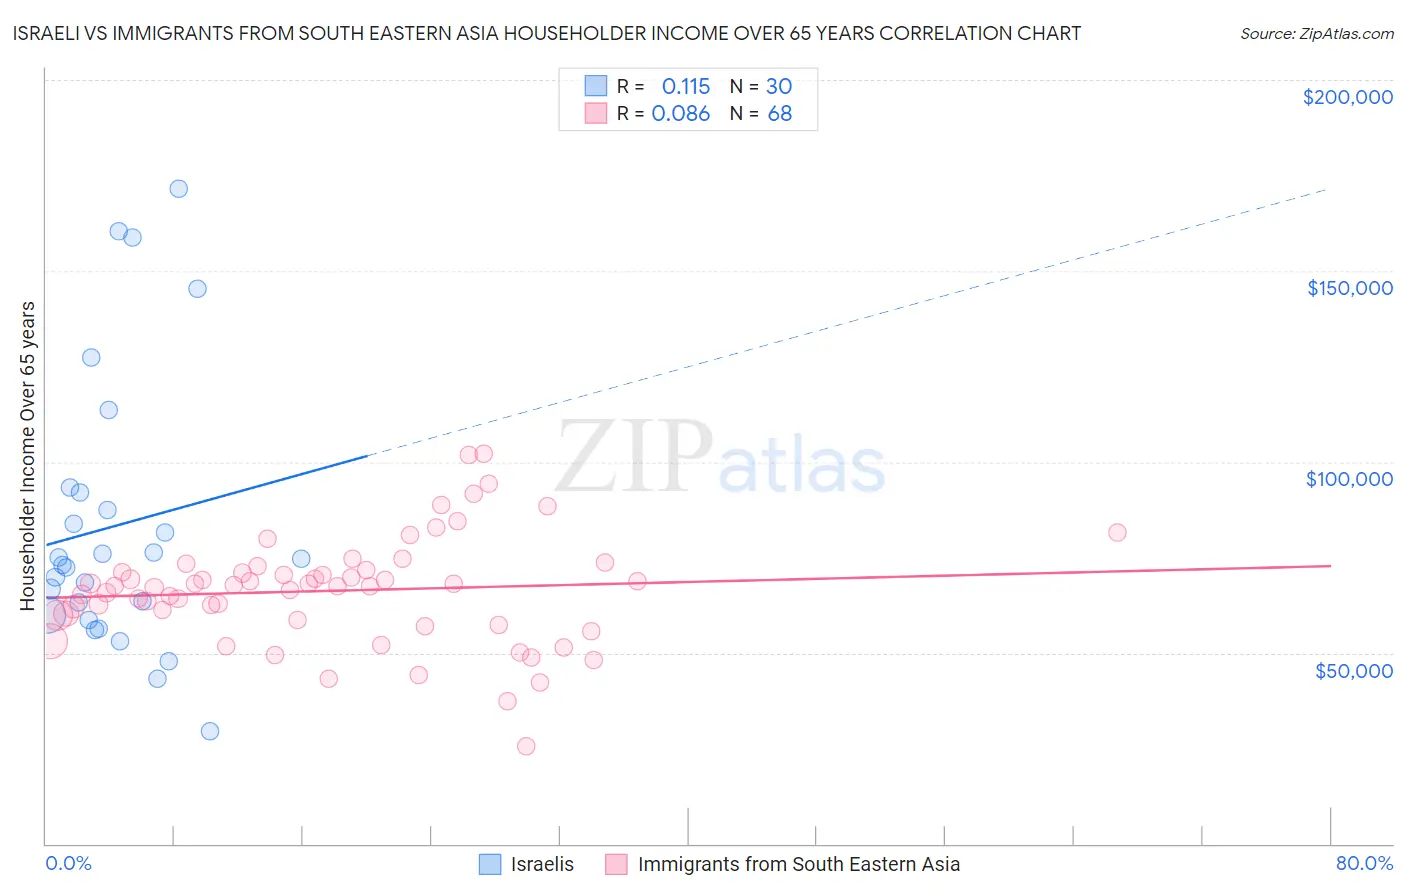 Israeli vs Immigrants from South Eastern Asia Householder Income Over 65 years